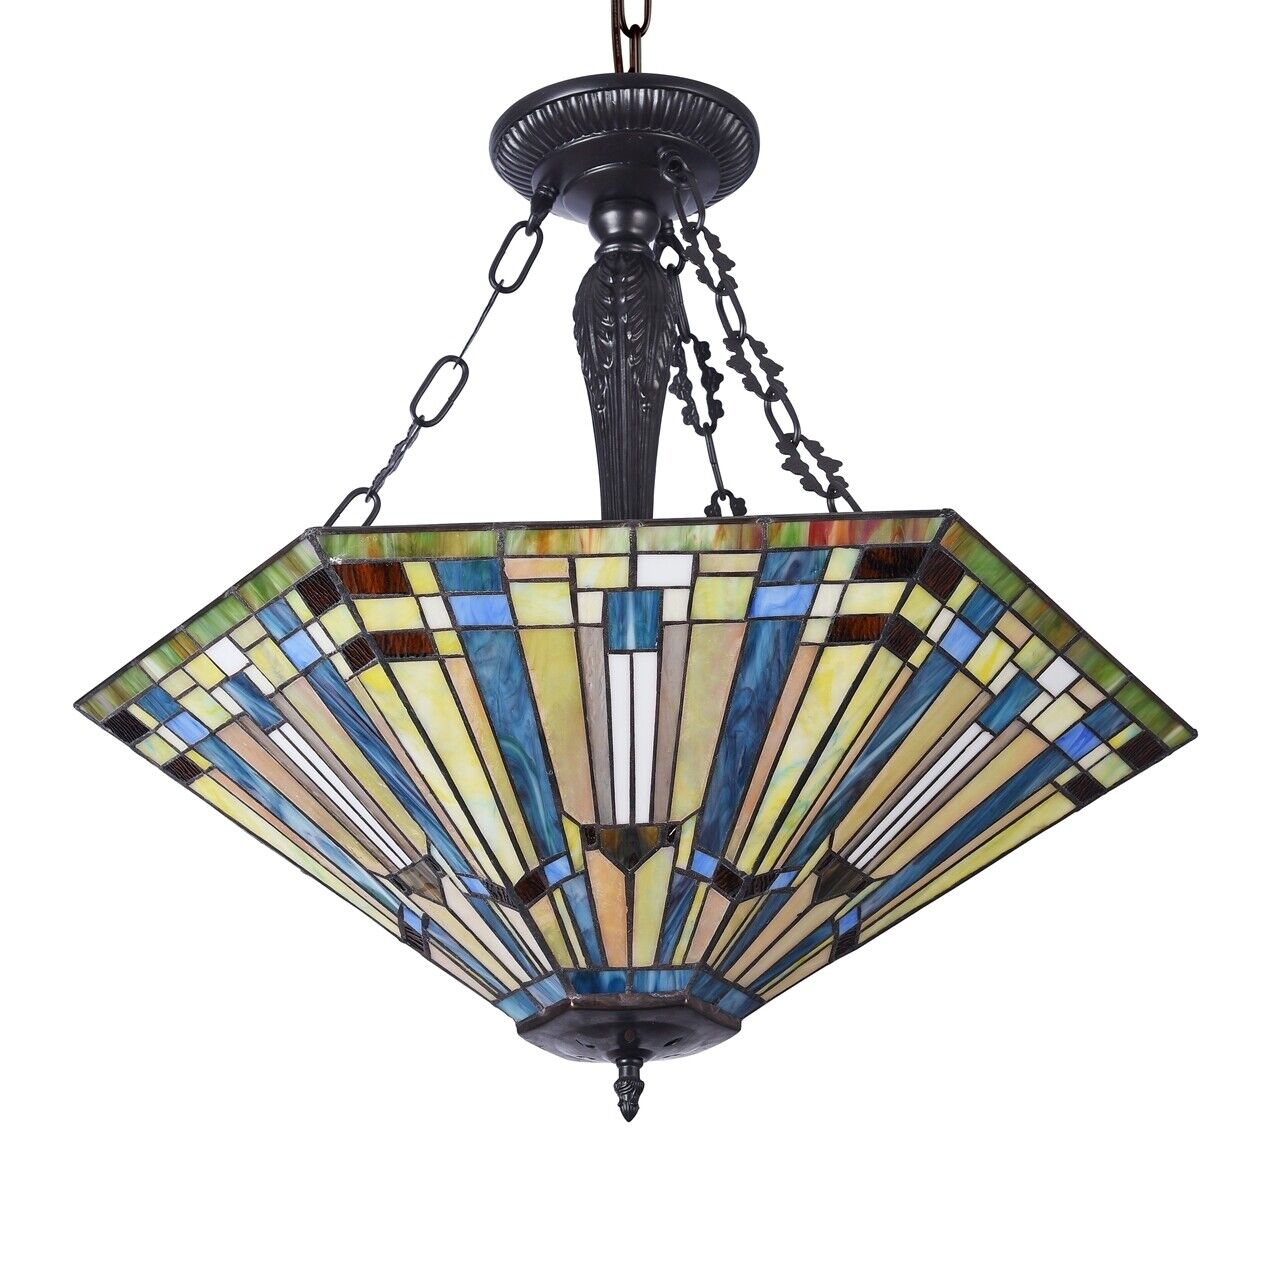 24.4" 3 Light Stained Glass Hanging Inverted Pendant Ceiling Uplight